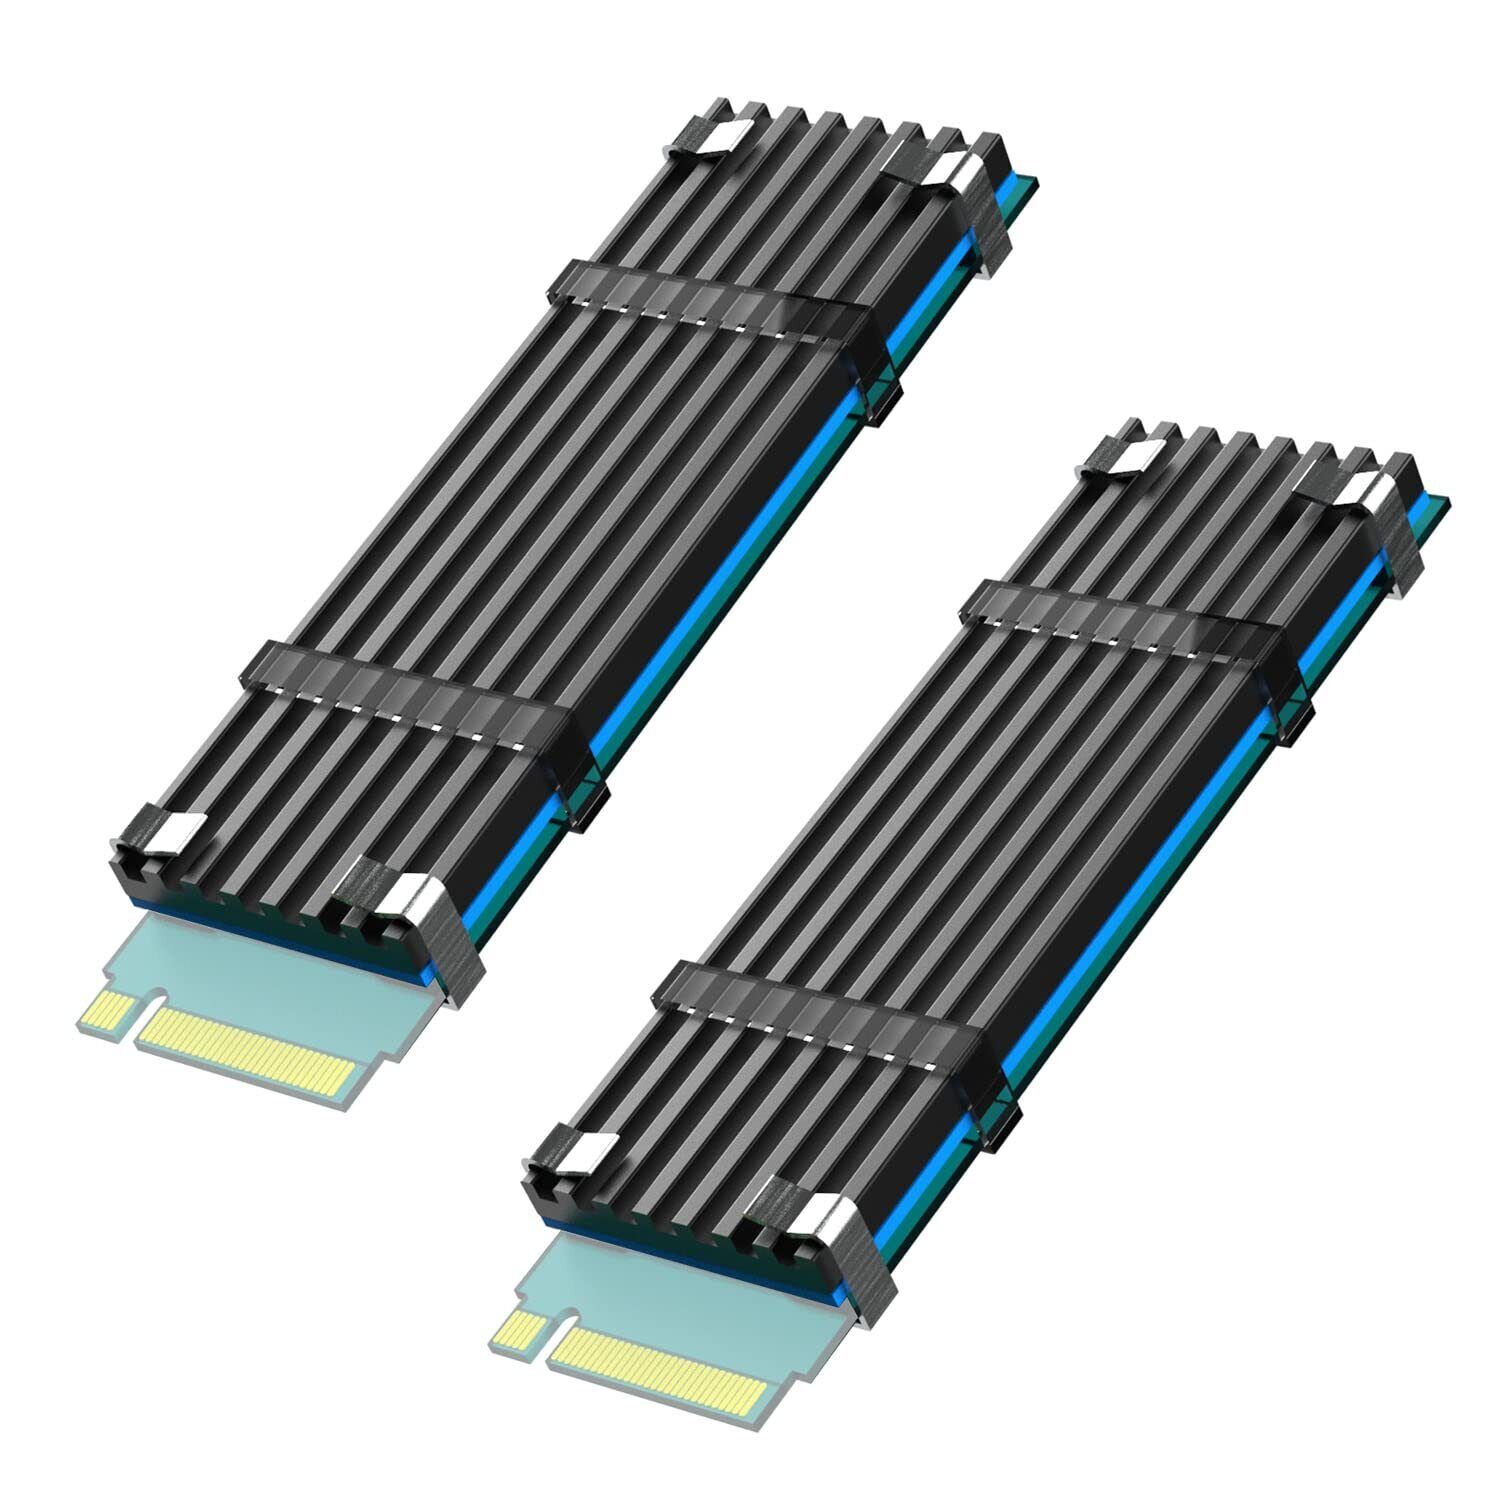 M.2 Heatsink With M.2 Thermal Pad For 2280 M.2 Pcie 4.0/3.0 Nvme Ssd (2 Packs)